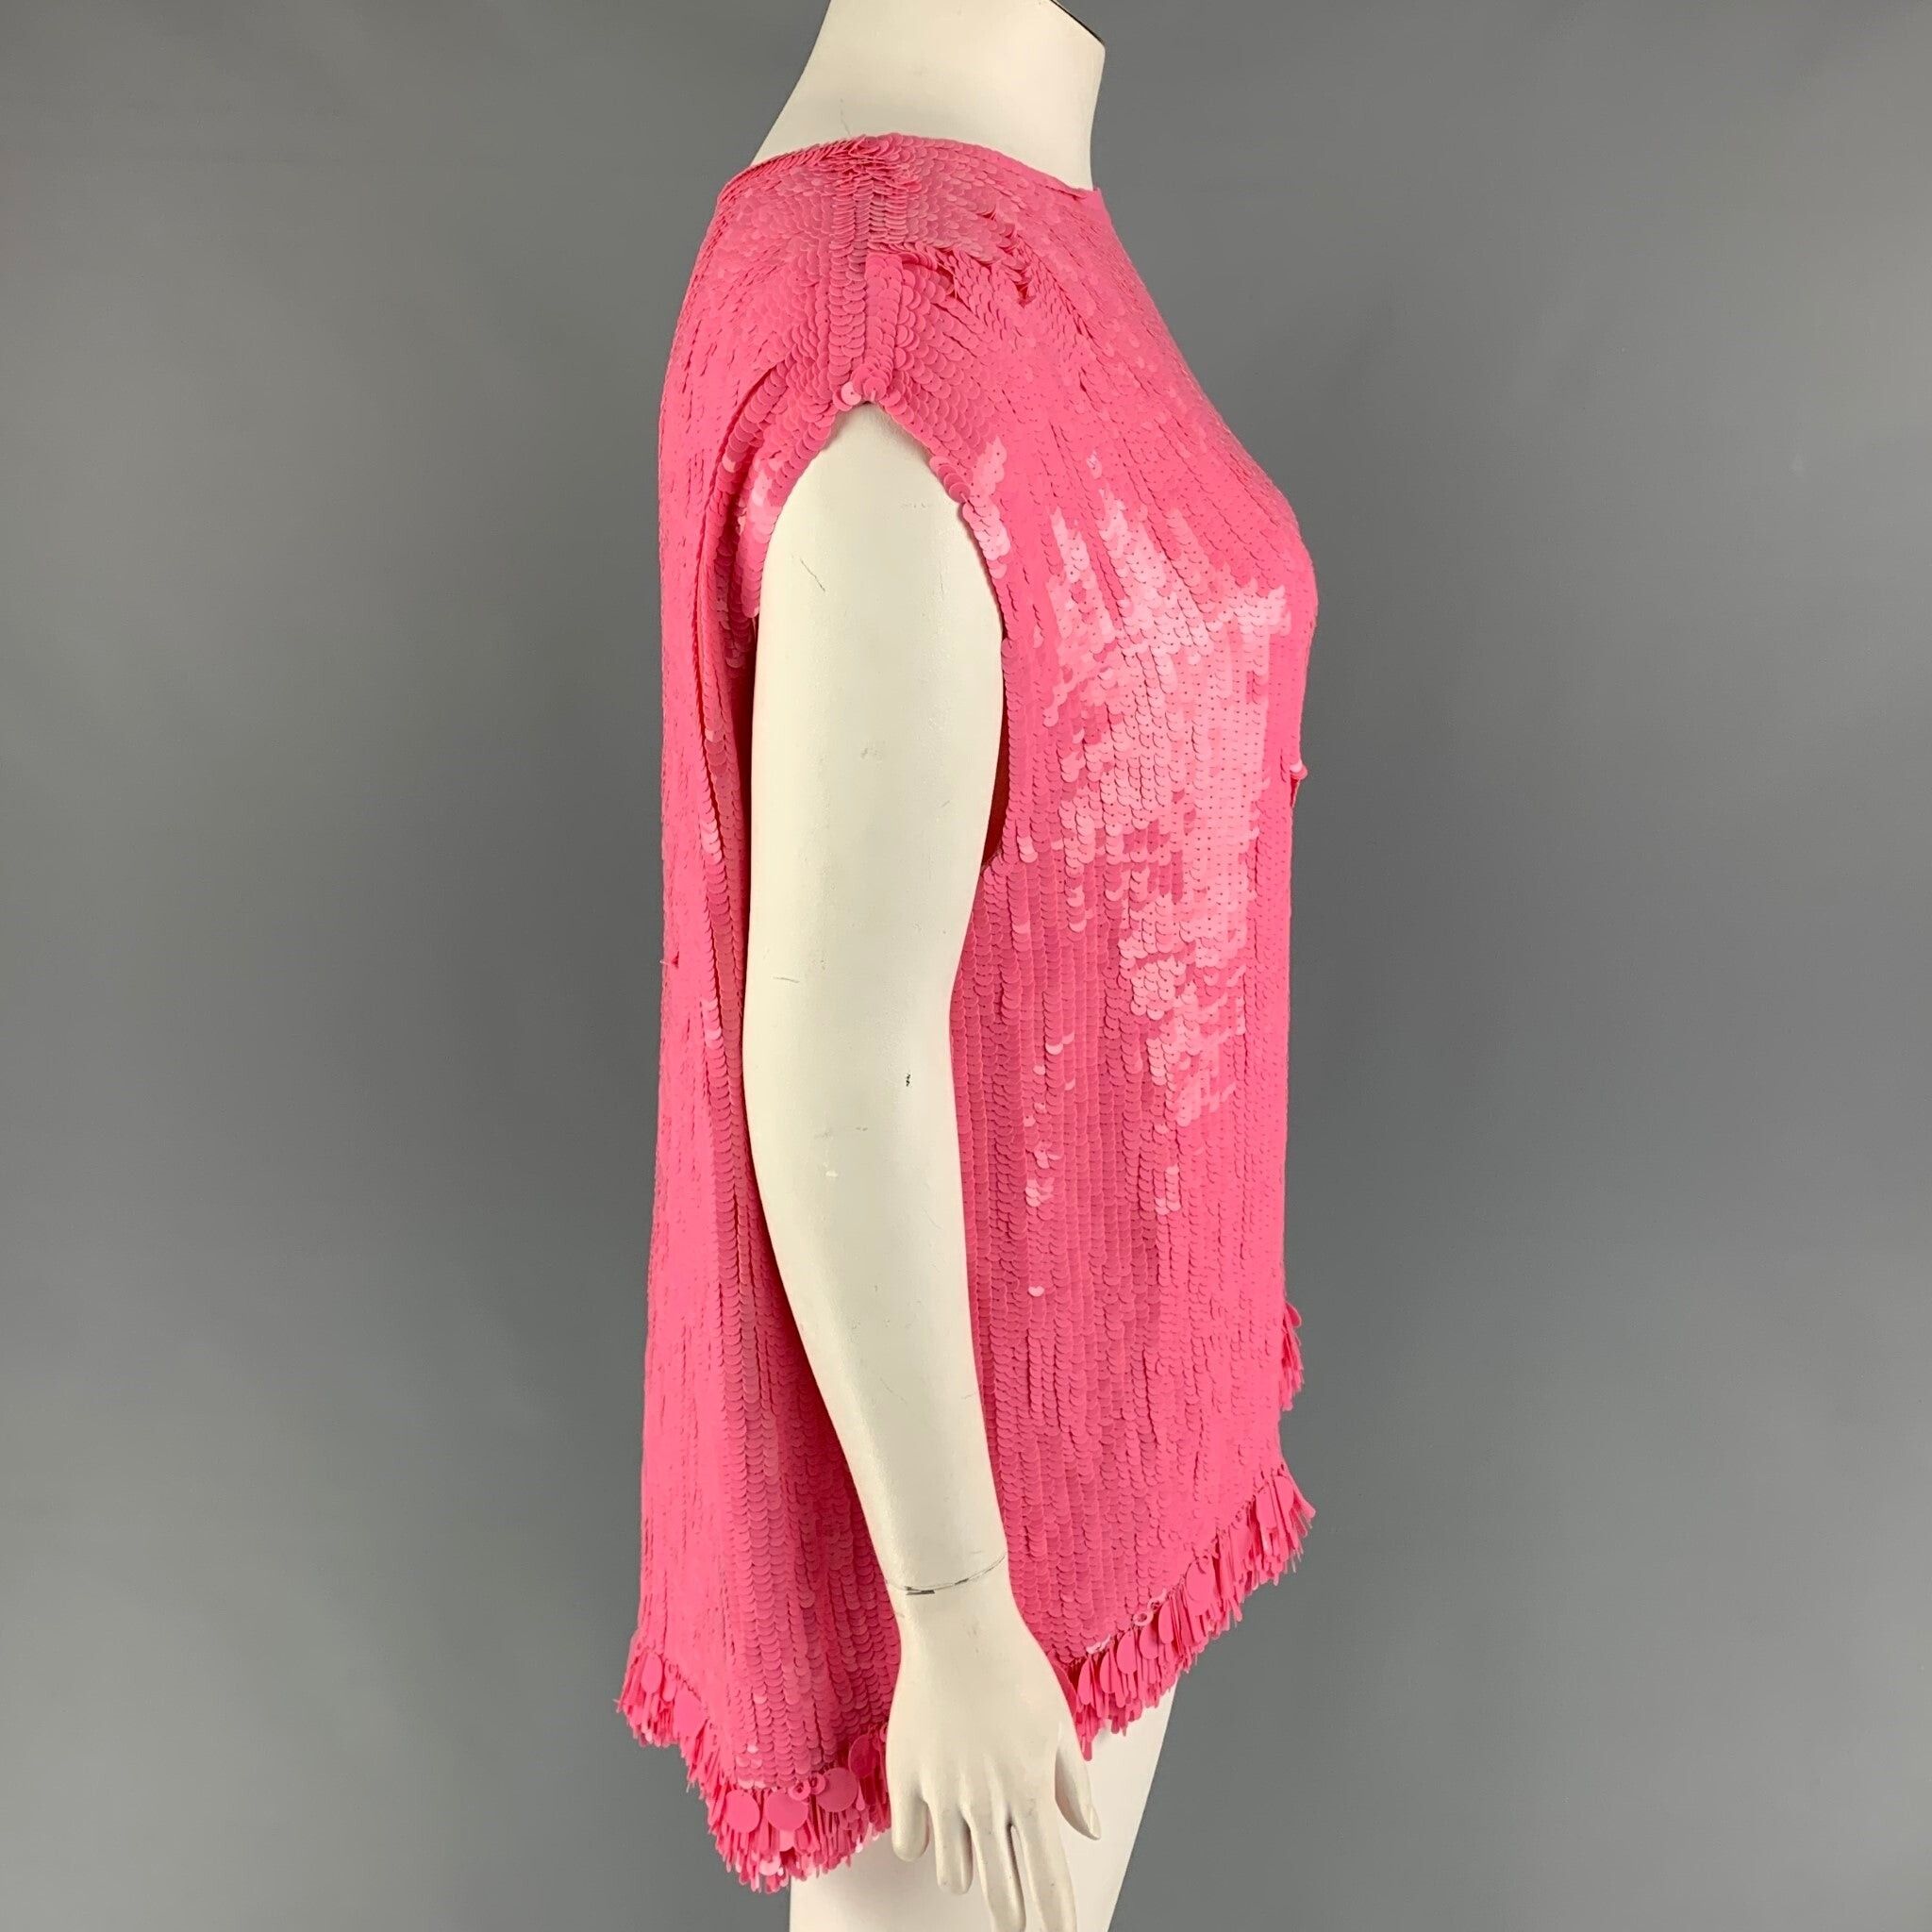 Dries Van Noten FW 21 Pink Viscose Sequined Sleeveless Dress Top Size L / US 10 / IT 46 - 2 Preview